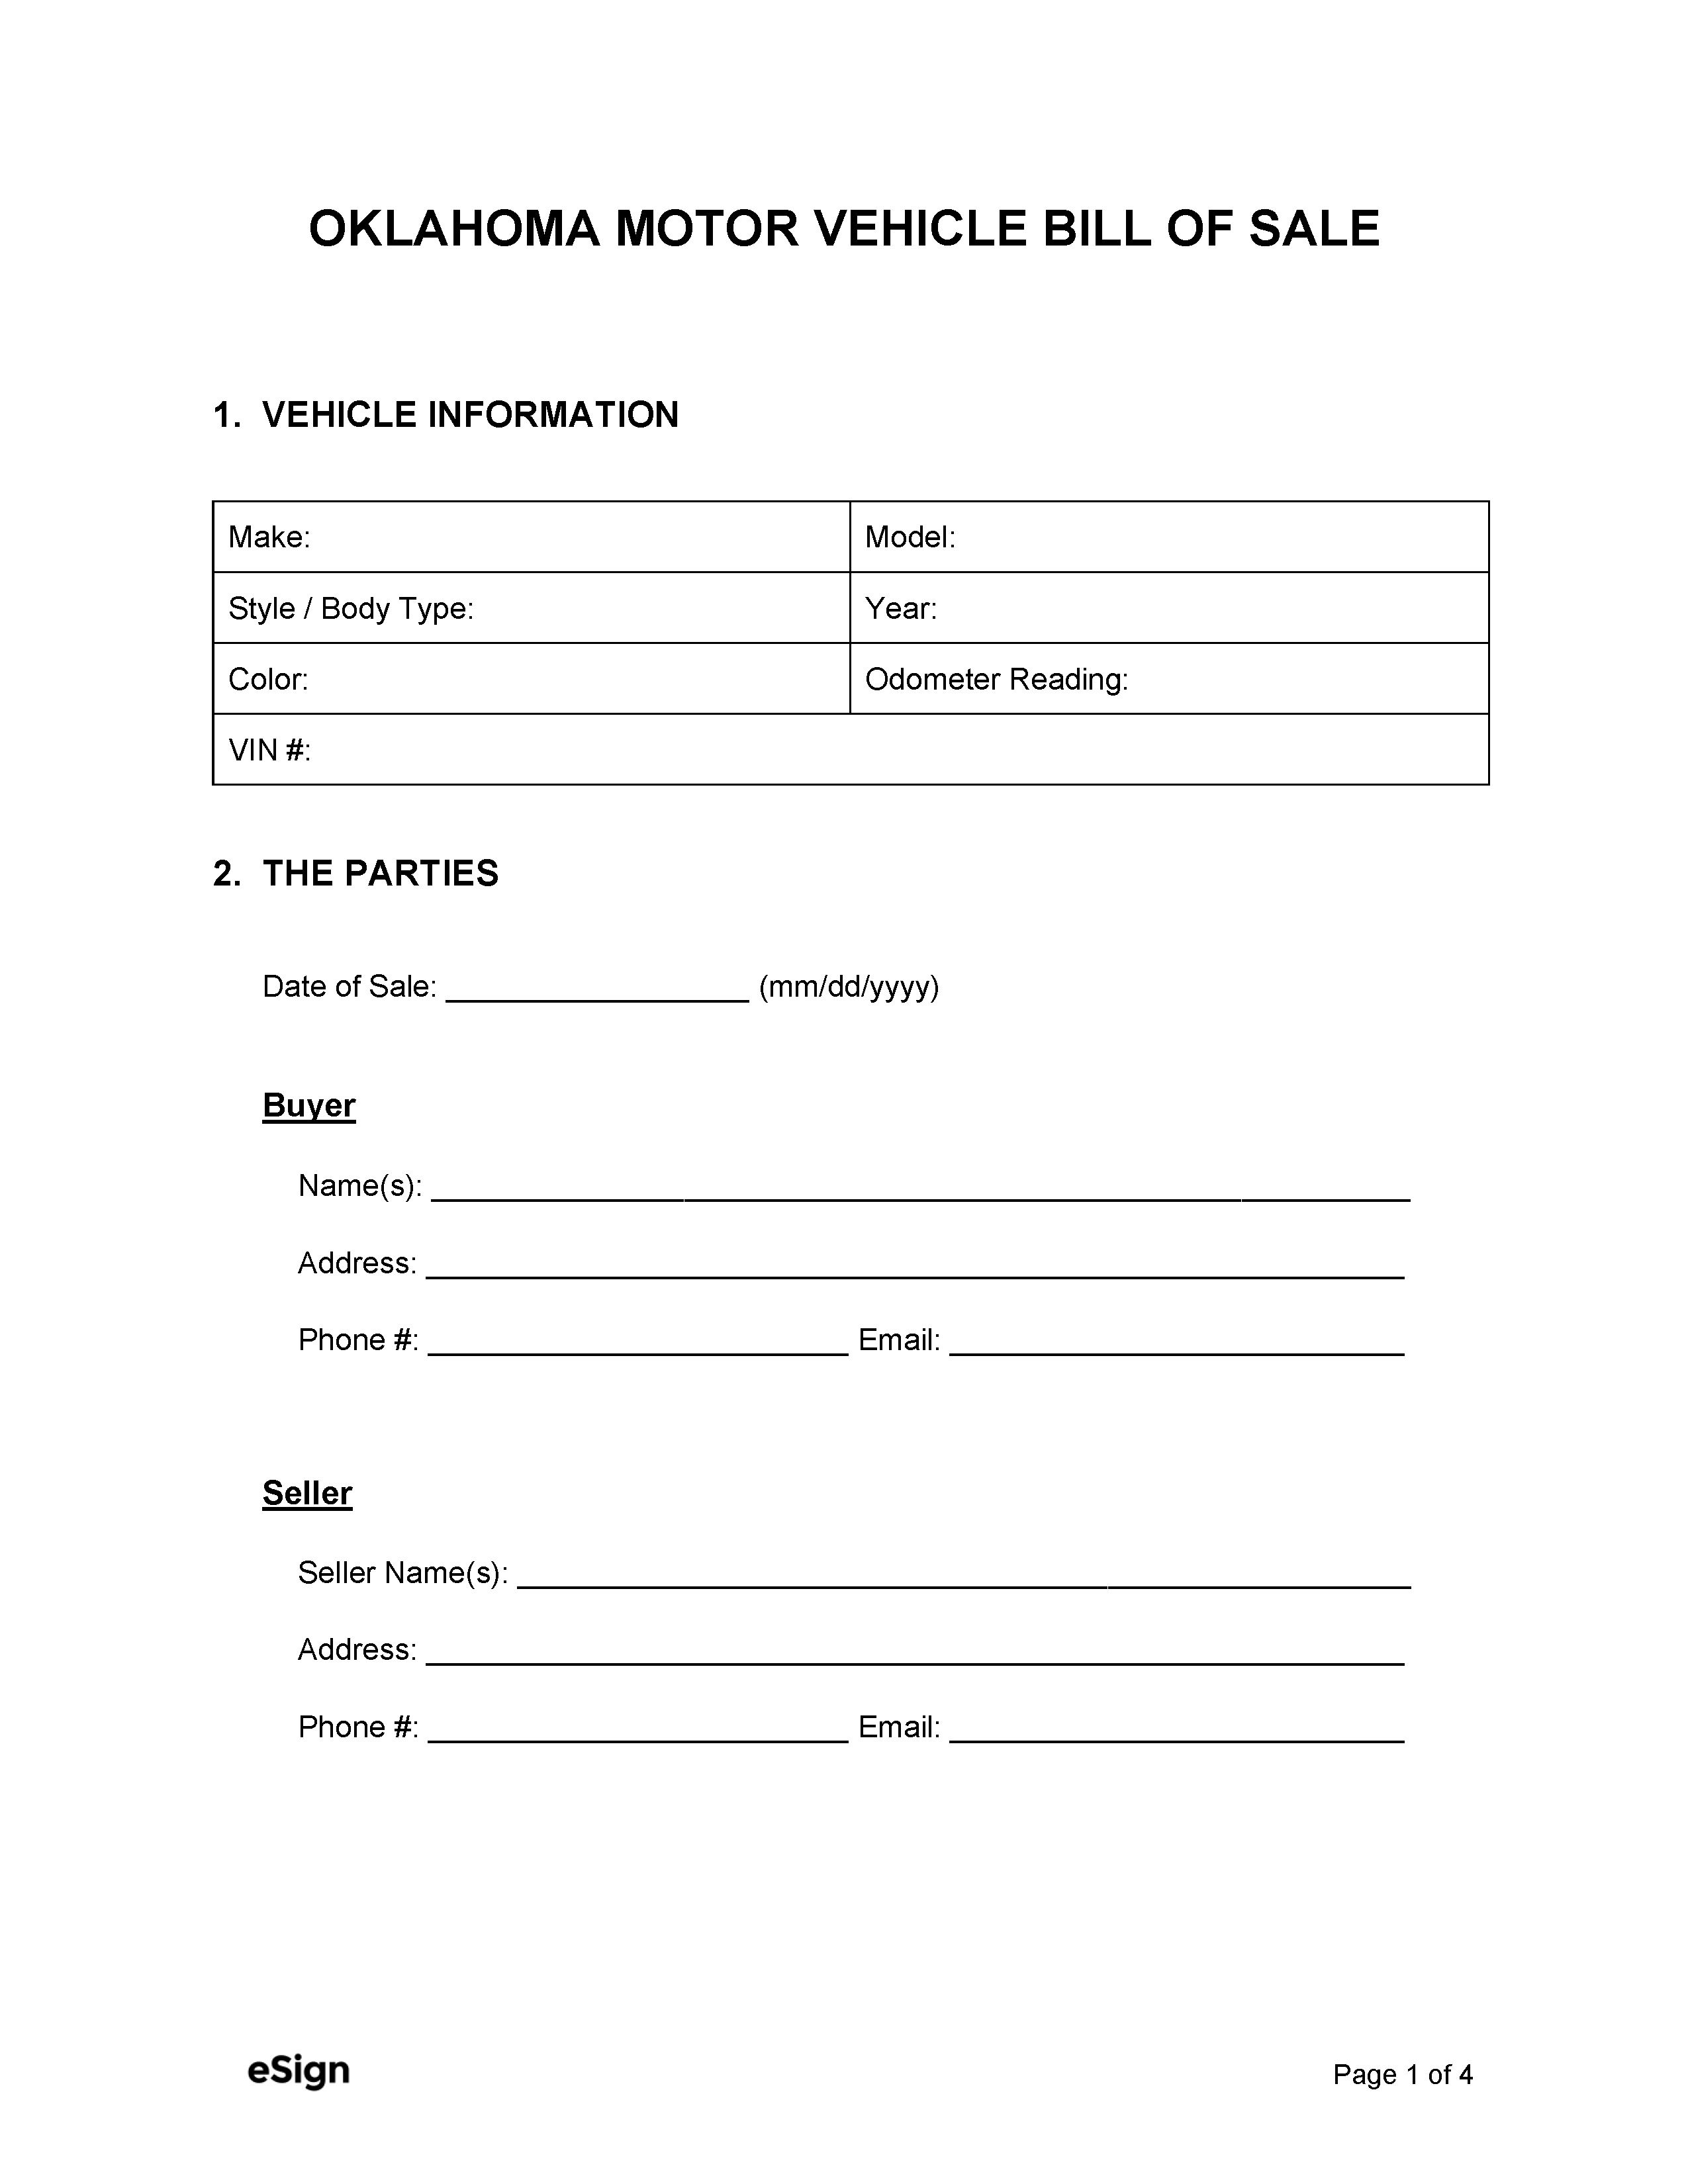 Free Oklahoma Motor Vehicle Bill of Sale Form - PDF  Word Throughout Vehicle Bill Of Sale Template Word